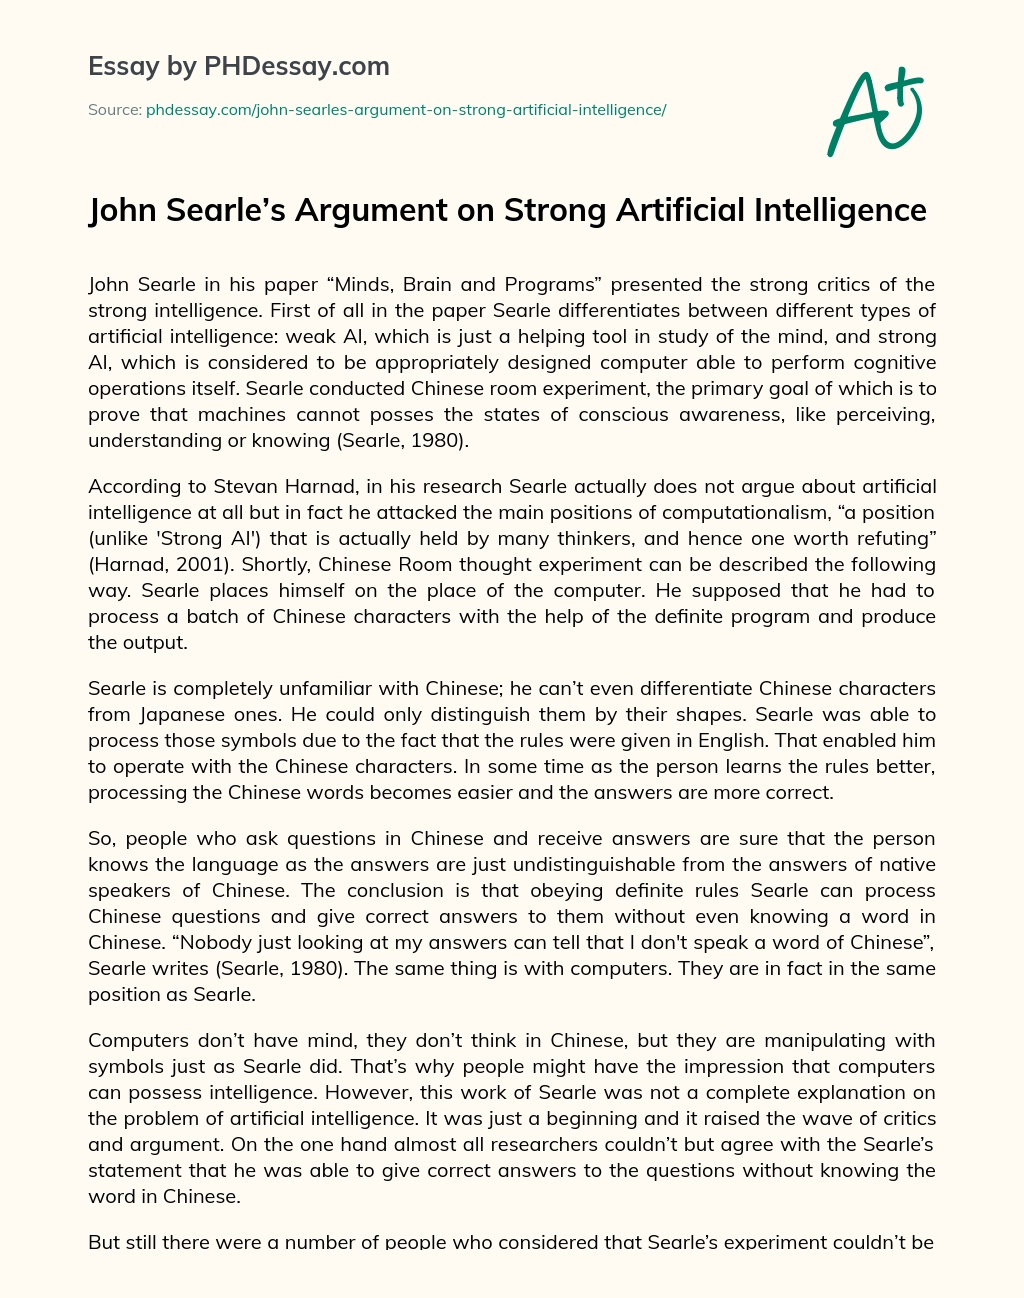 John Searle’s Argument on Strong Artificial Intelligence essay